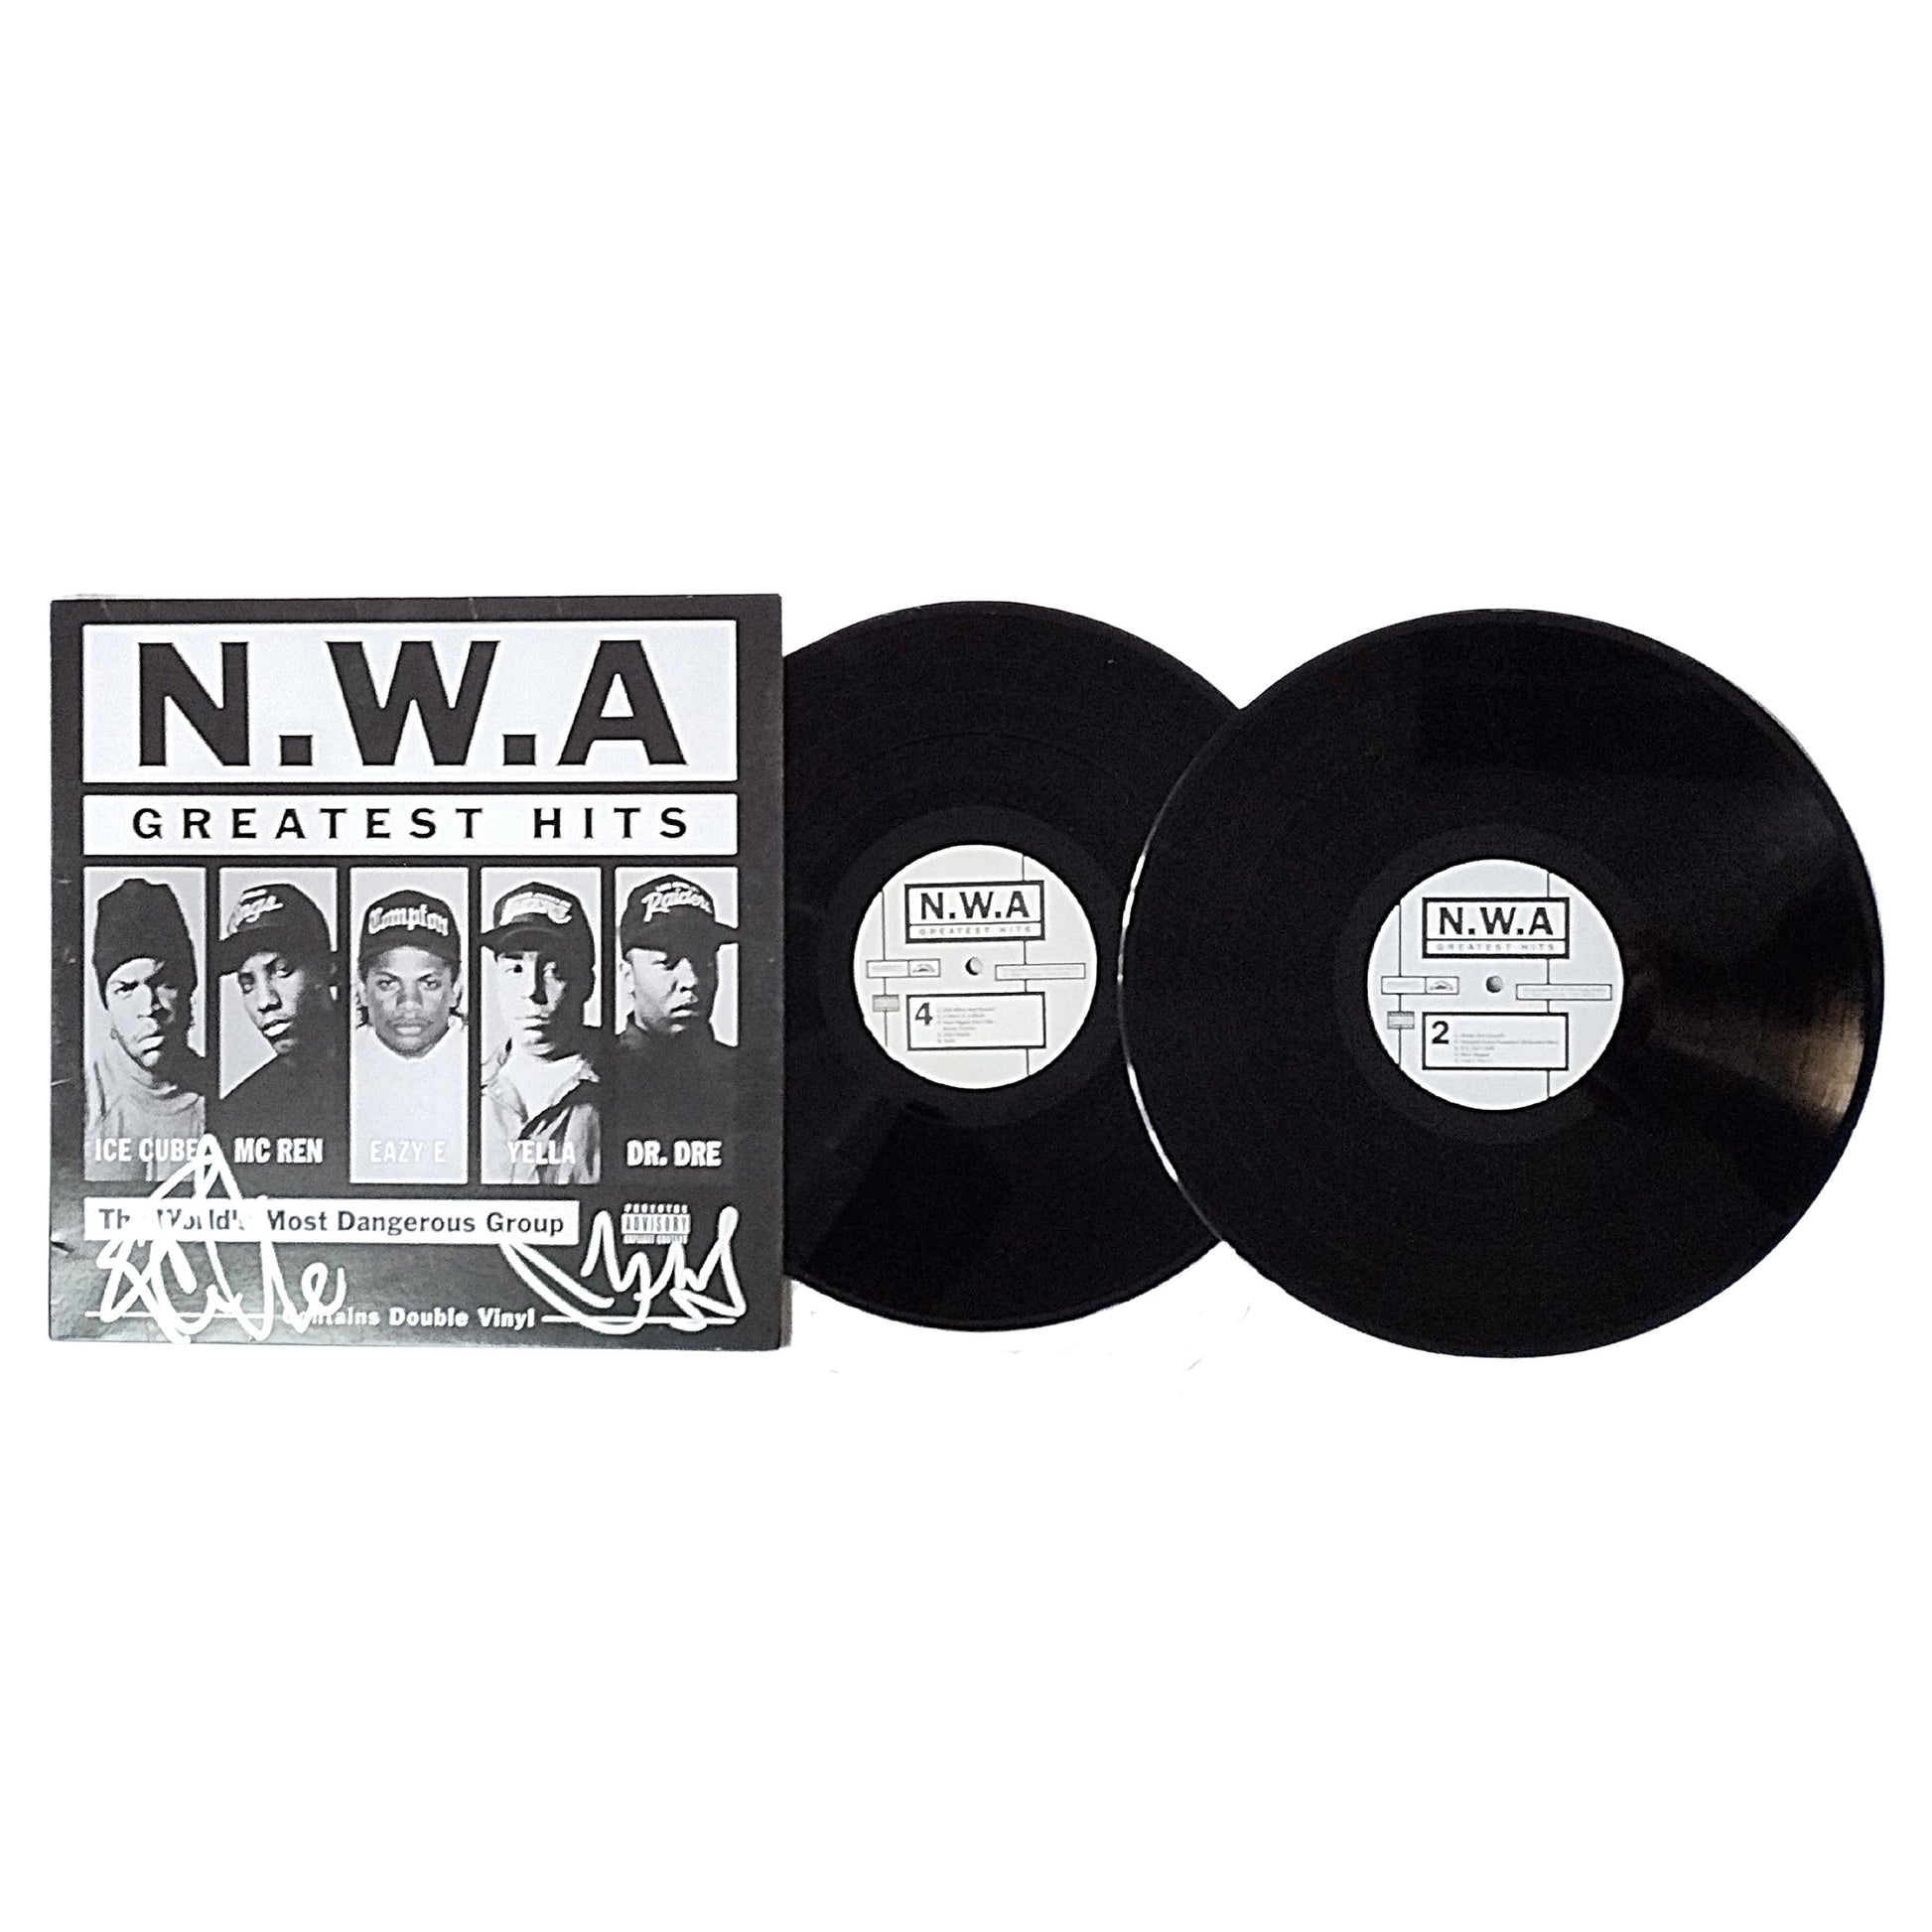 Music- Autographed- Ice Cube and DJ Yella Signed NWA Greatest Hits Vinyl Record Album Cover Proof Photos Beckett BAS Authentication 105